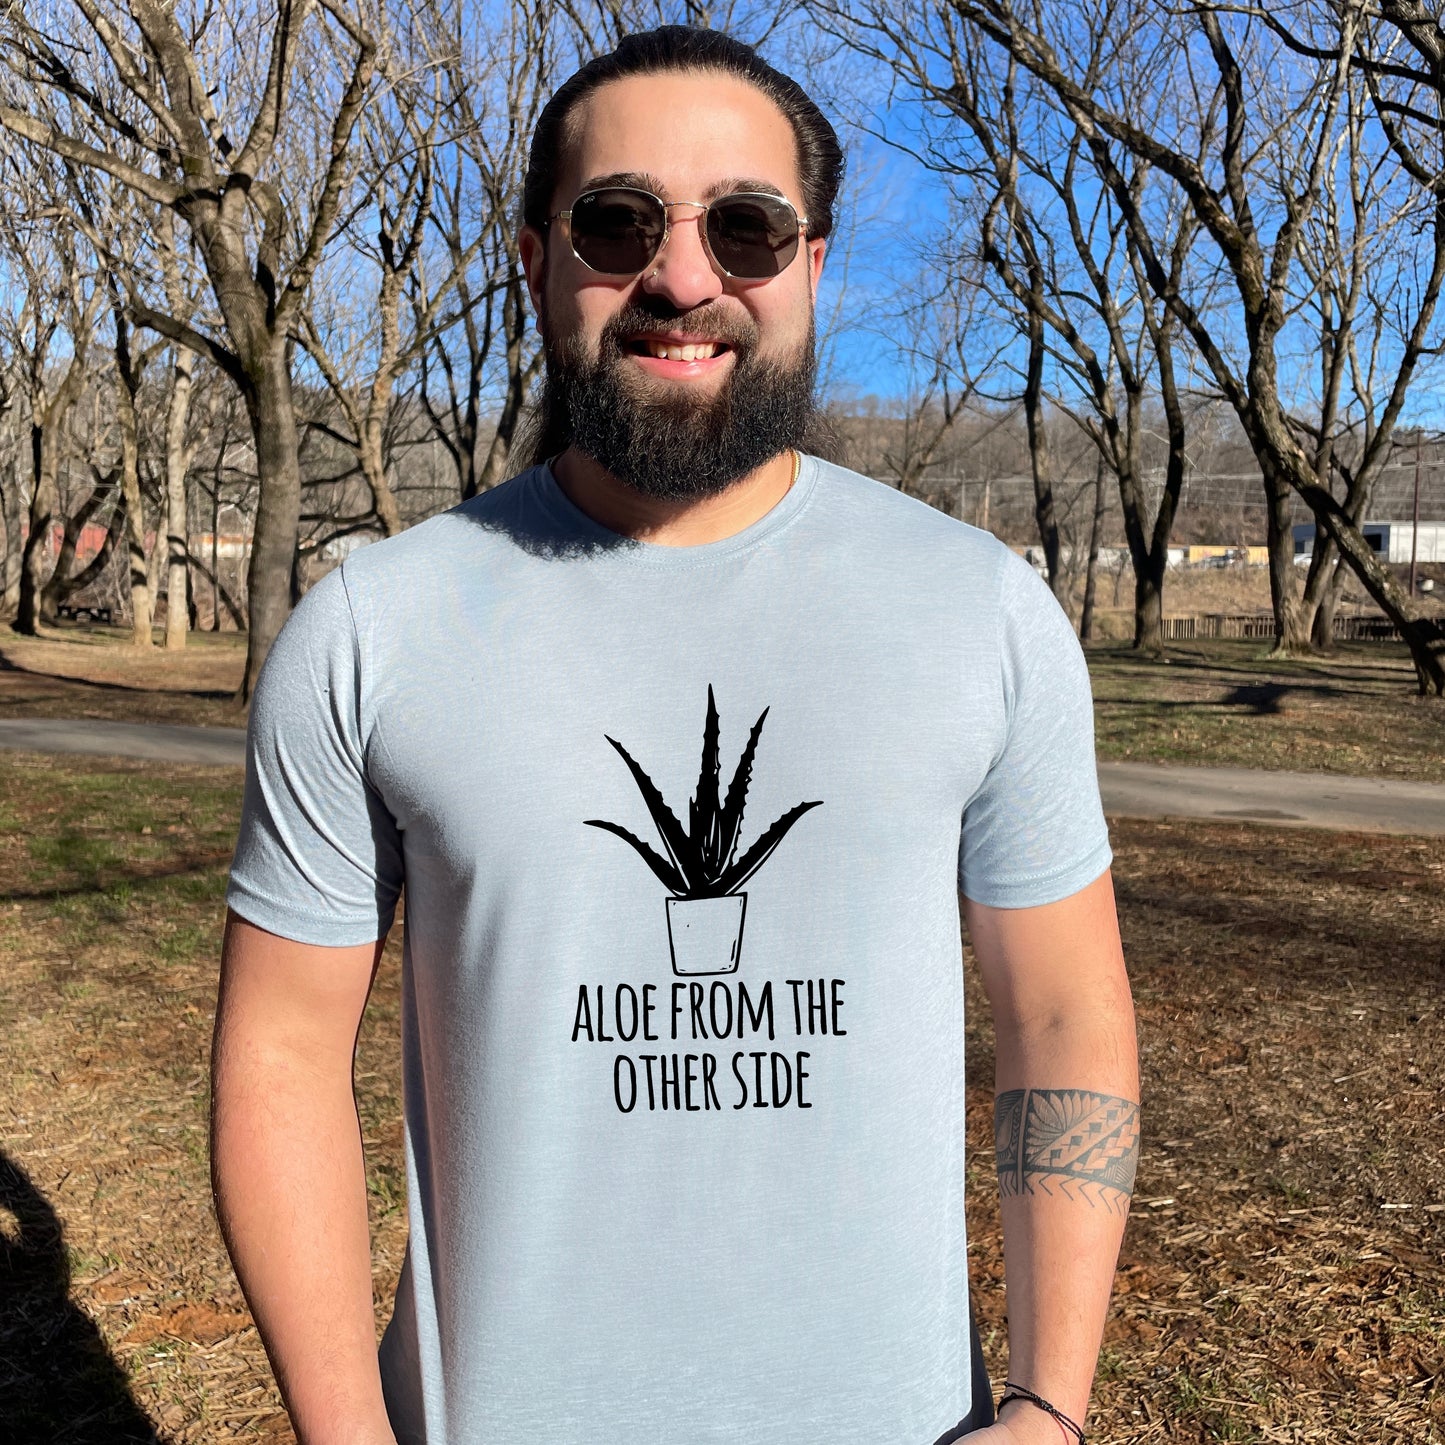 Aloe From The Other Side - Men's / Unisex Tee - Stonewash Blue or Sage